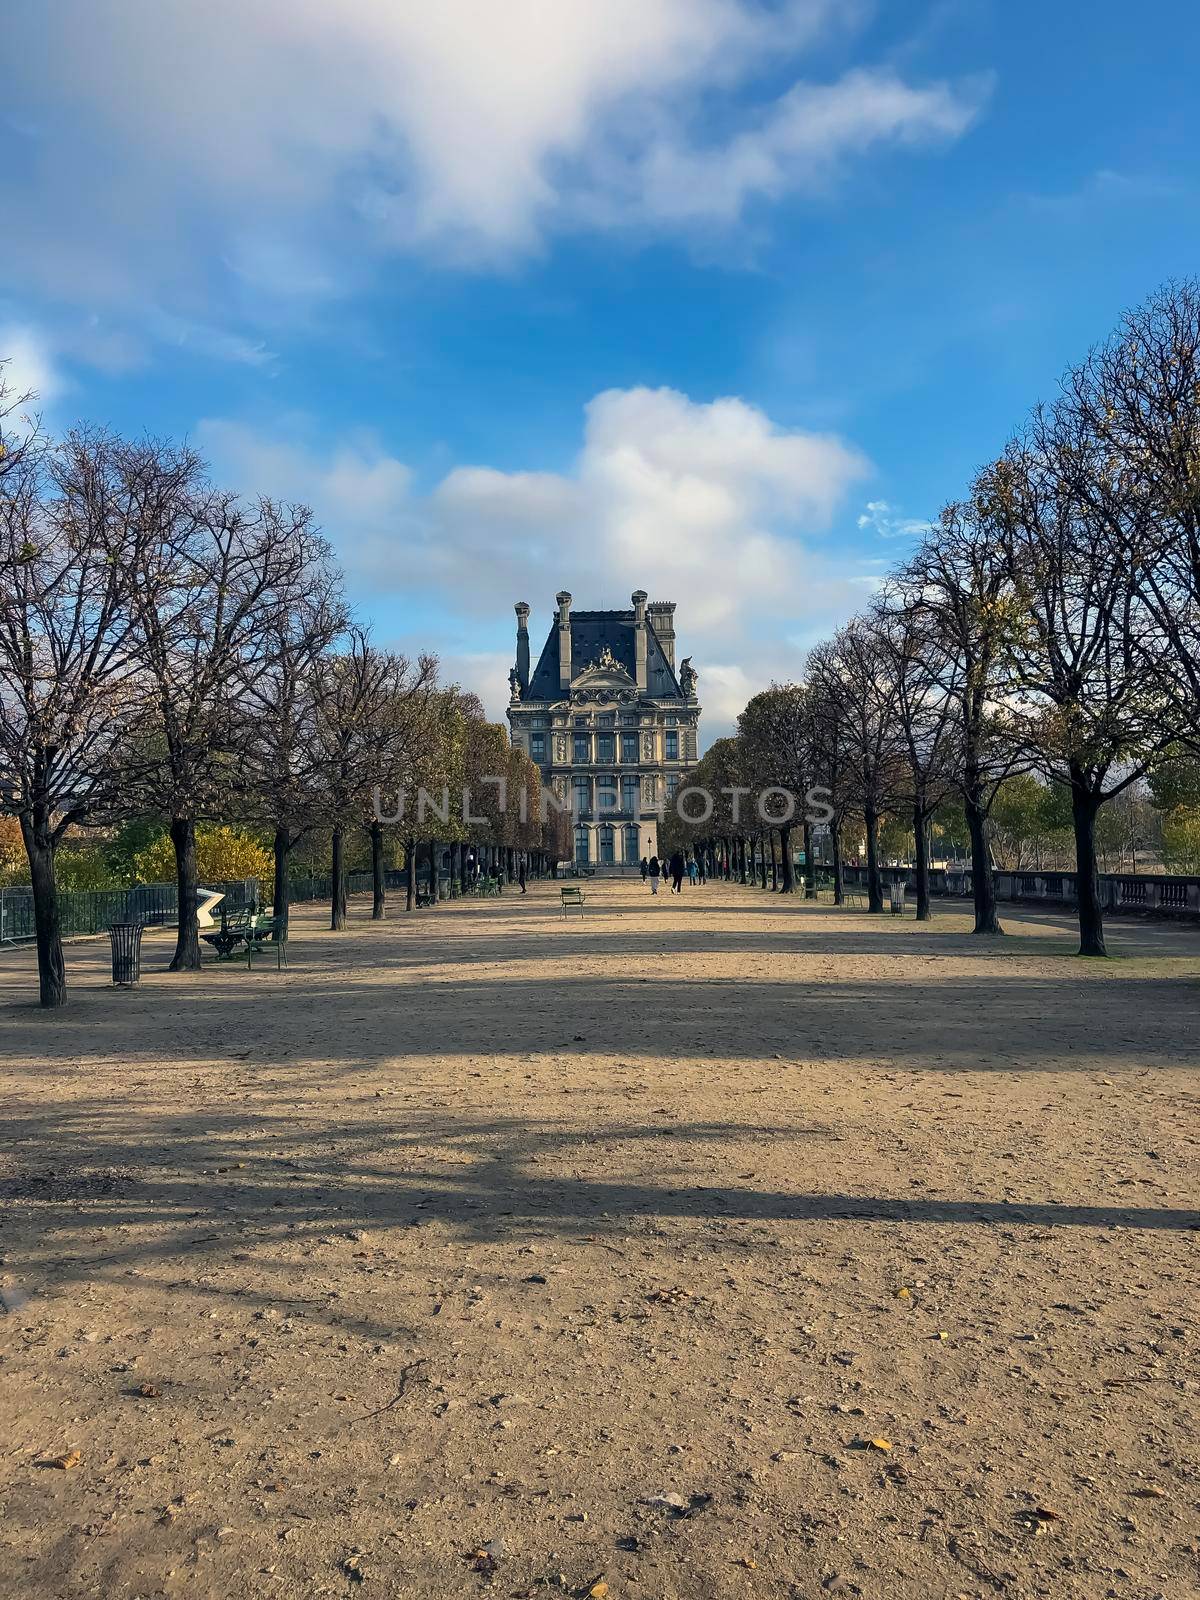 Avenue of trees in autumn leading to the Musee du Louvre in Paris France by kaliaevaen